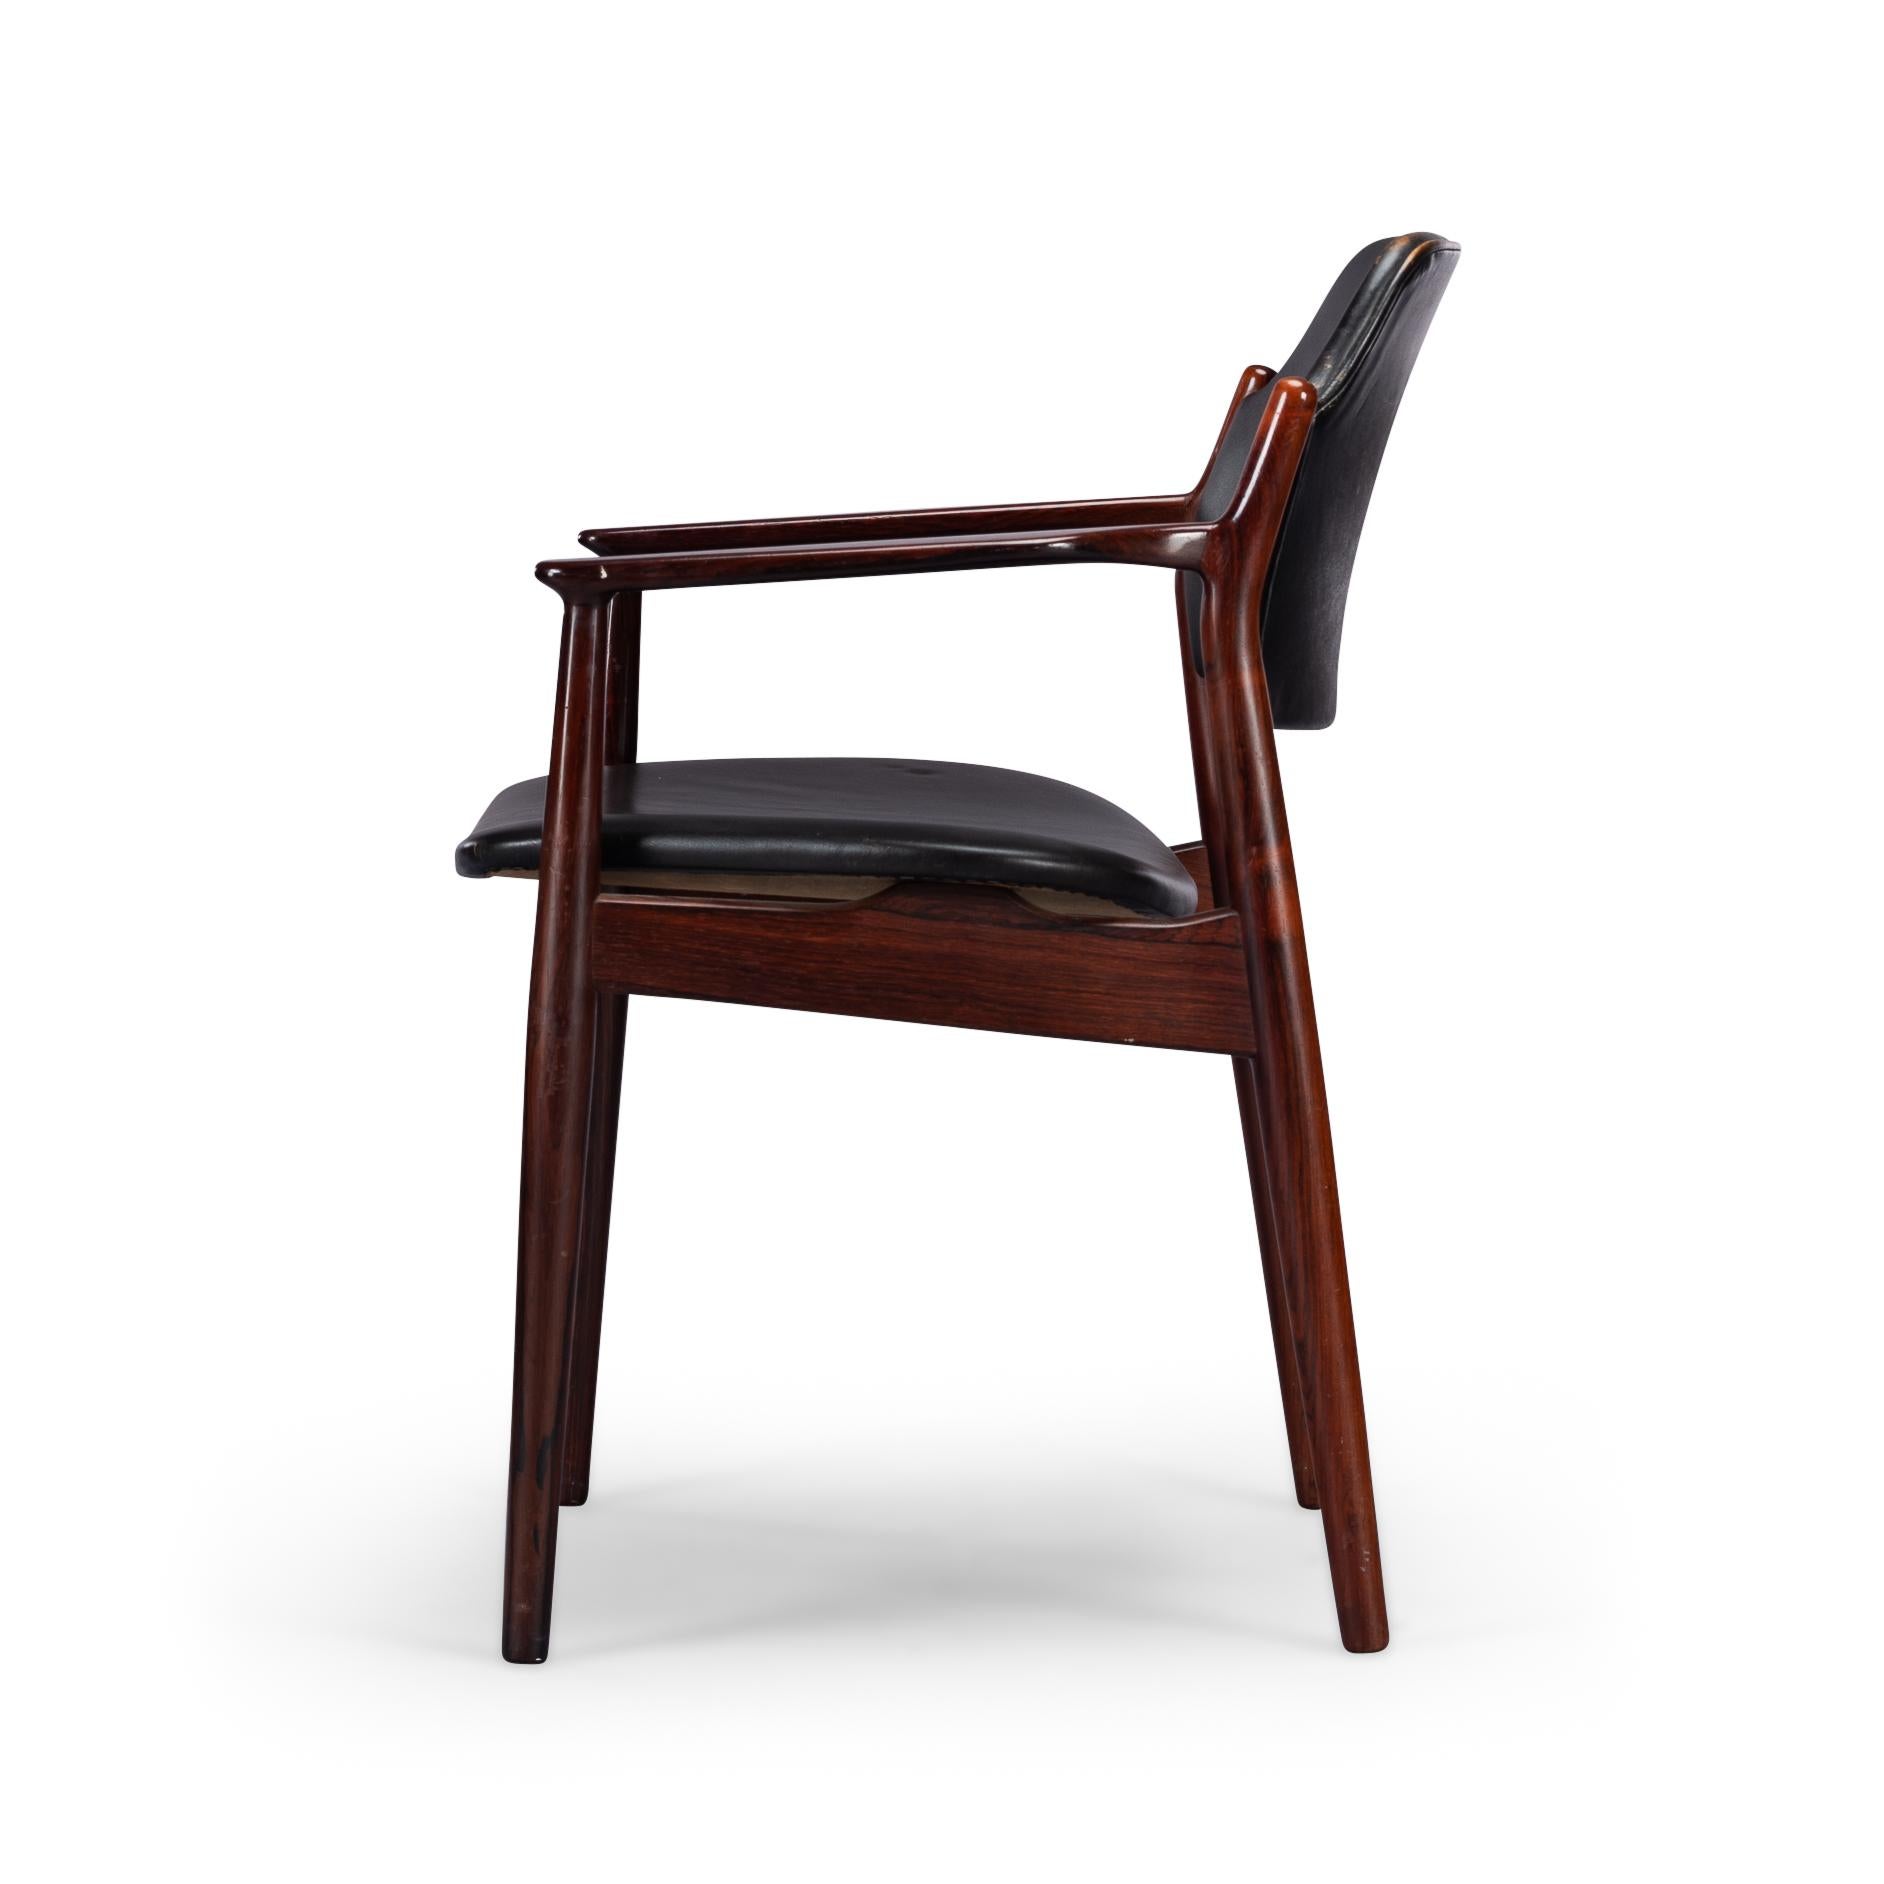 Mid-20th Century Desk Chair No. 62a in Rosewood with Black Leather, 1960s